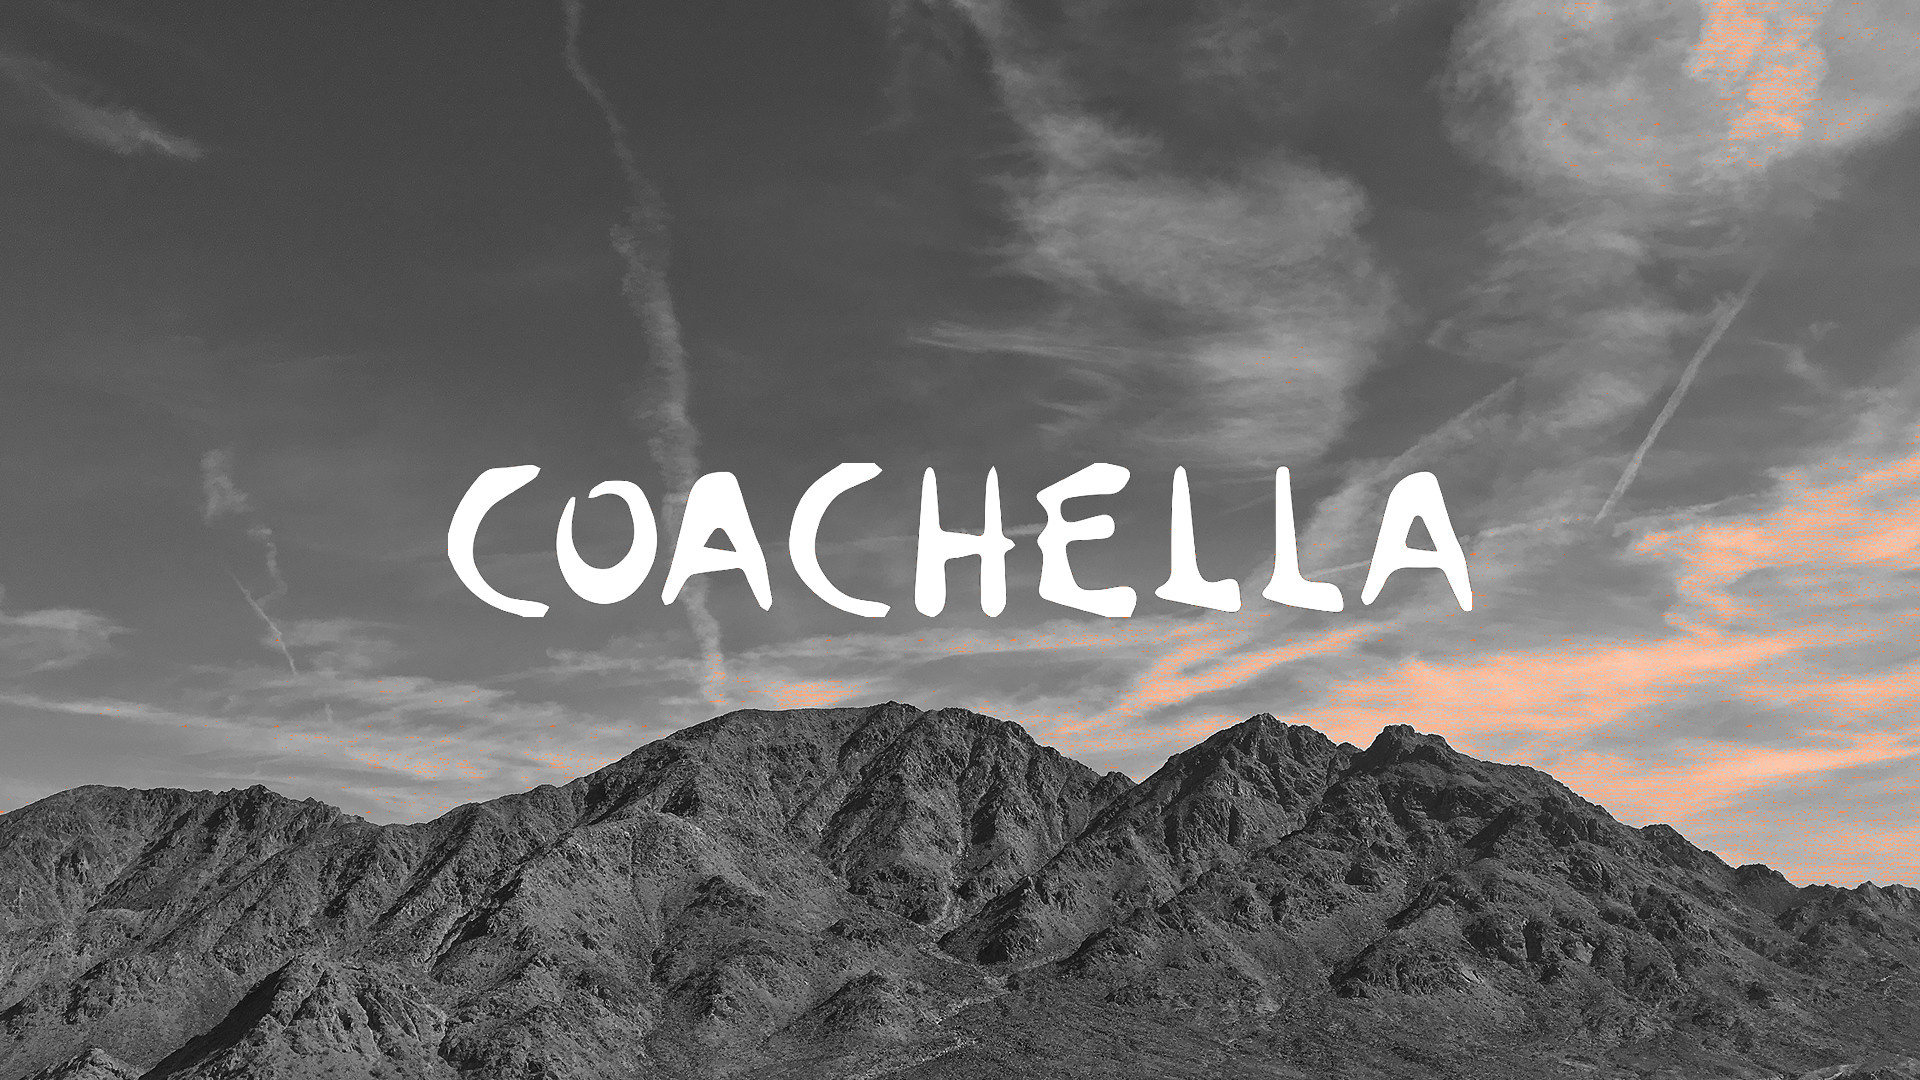 Coachella: One of the most popular music festivals in the world. 1920x1080 Full HD Wallpaper.